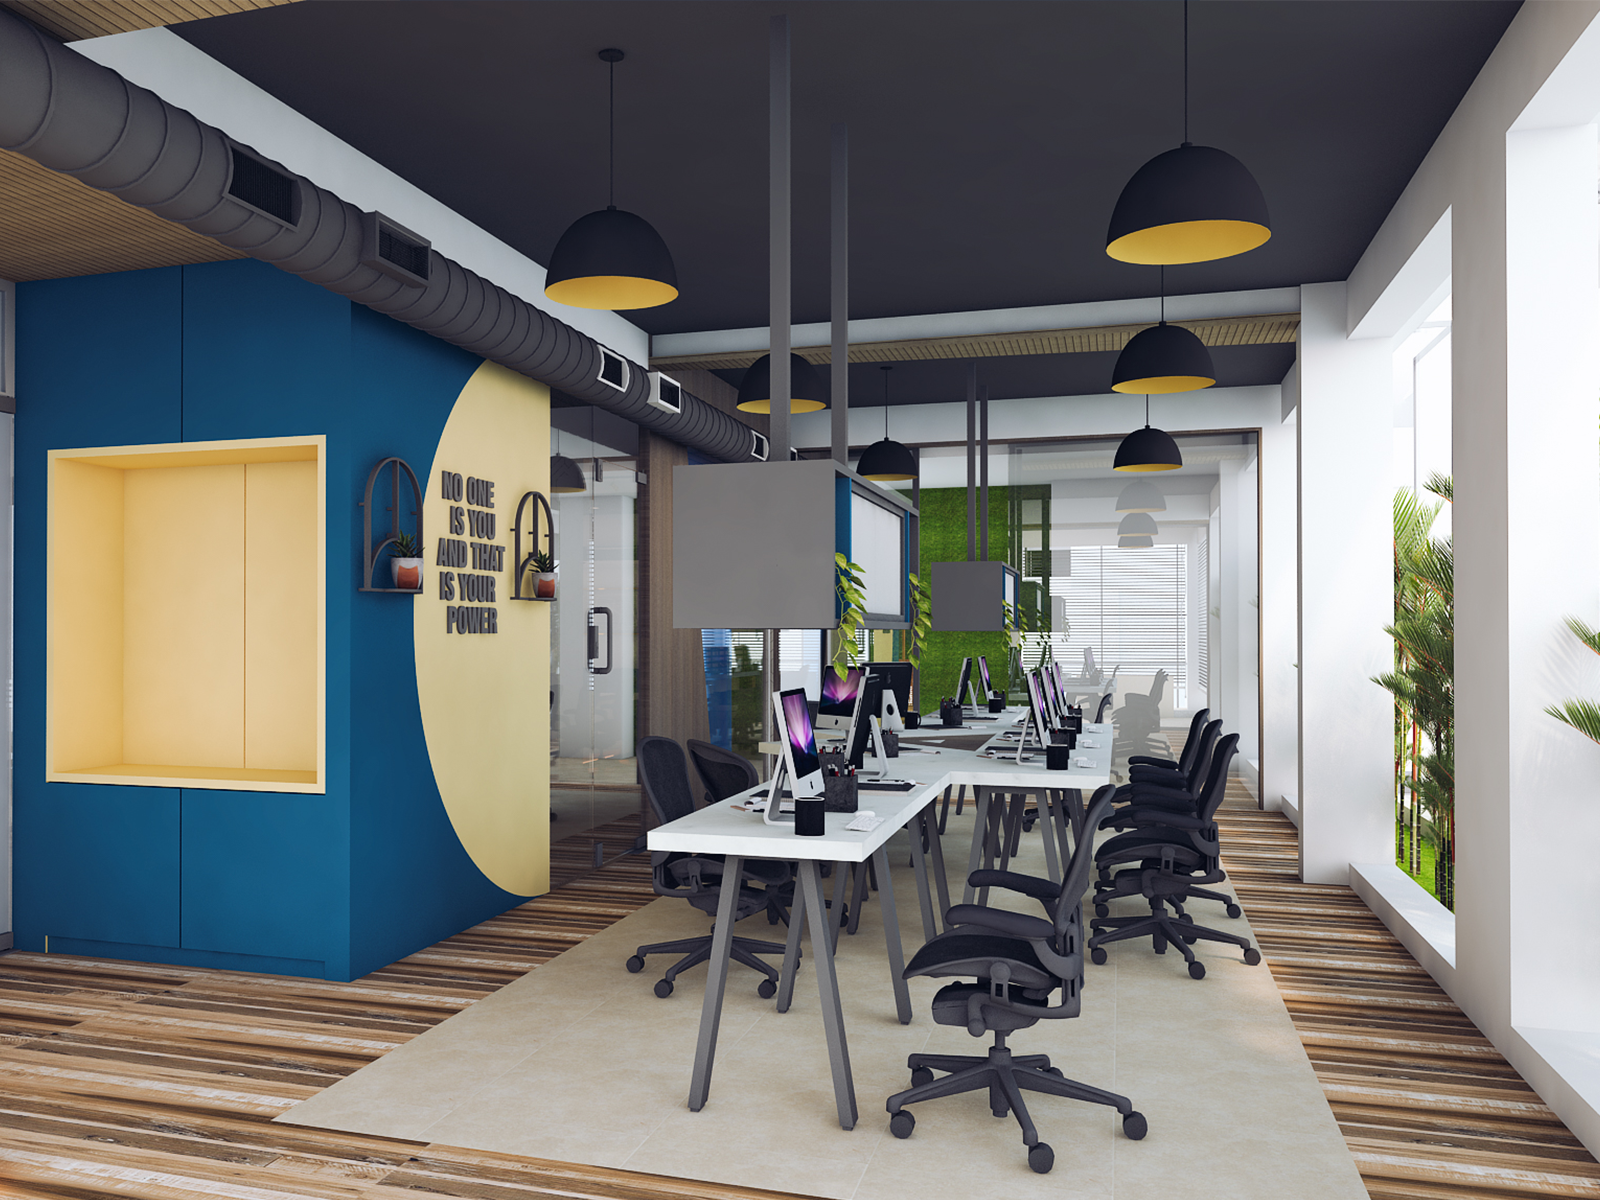 We are Provide the Best Interior Office Design